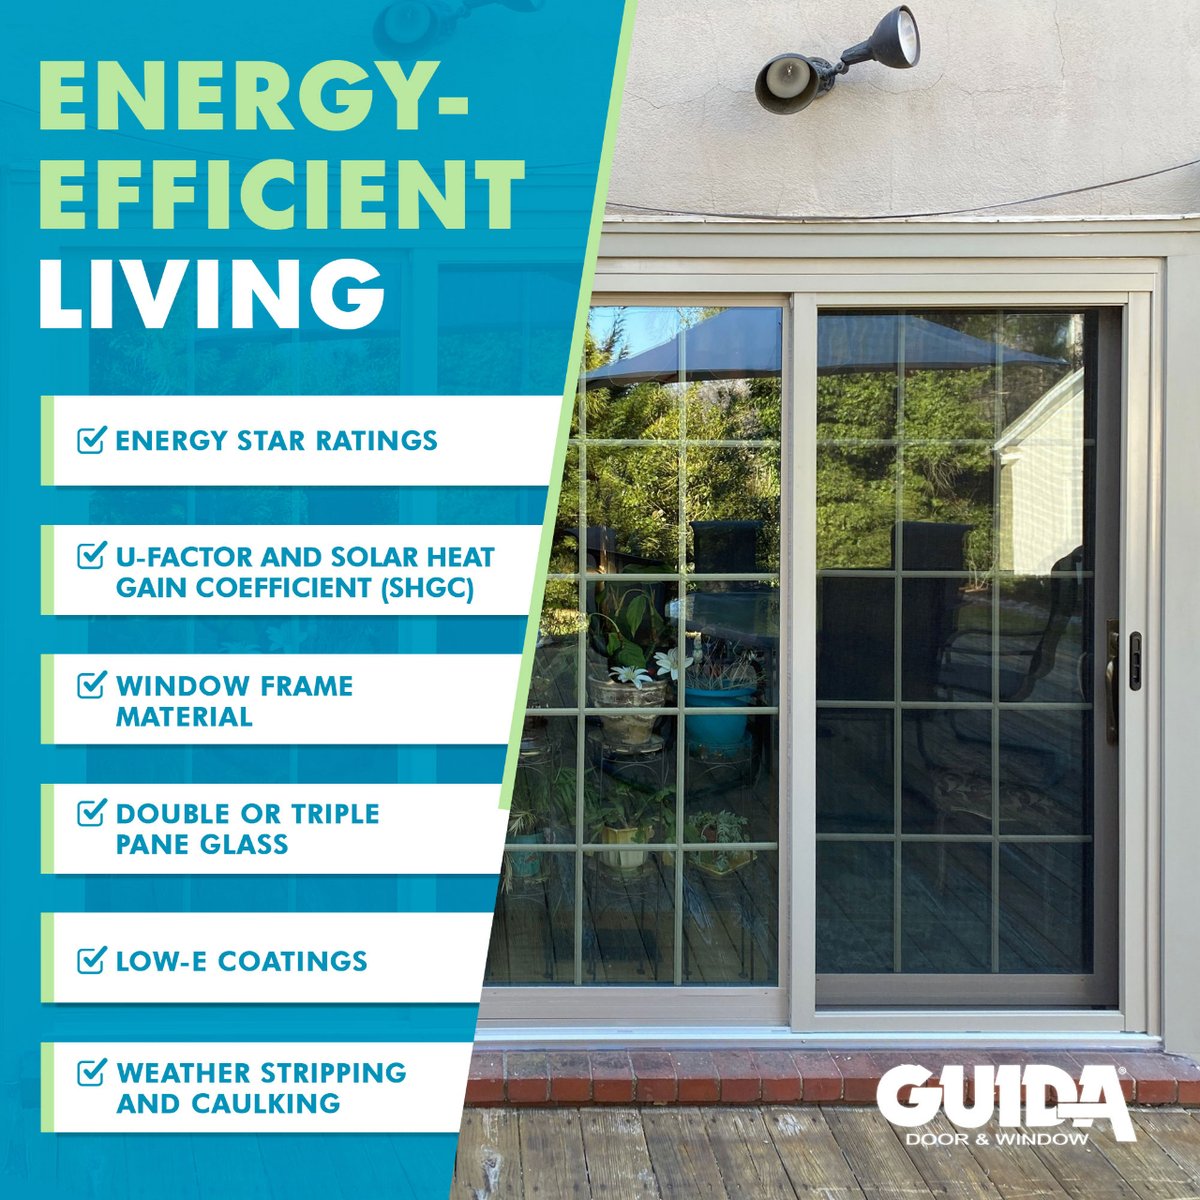 Enhance your home's efficiency with Guida's energy-saving solutions. 🌱💡 Share your favorite eco-friendly home tips in the comments! 

#EfficientLiving #GreenHome #EnergySavings #GuidaTips #HomeImprovement #Guida #GuidaQuality #GuidaDoors #GoGuida #GuidaWindows